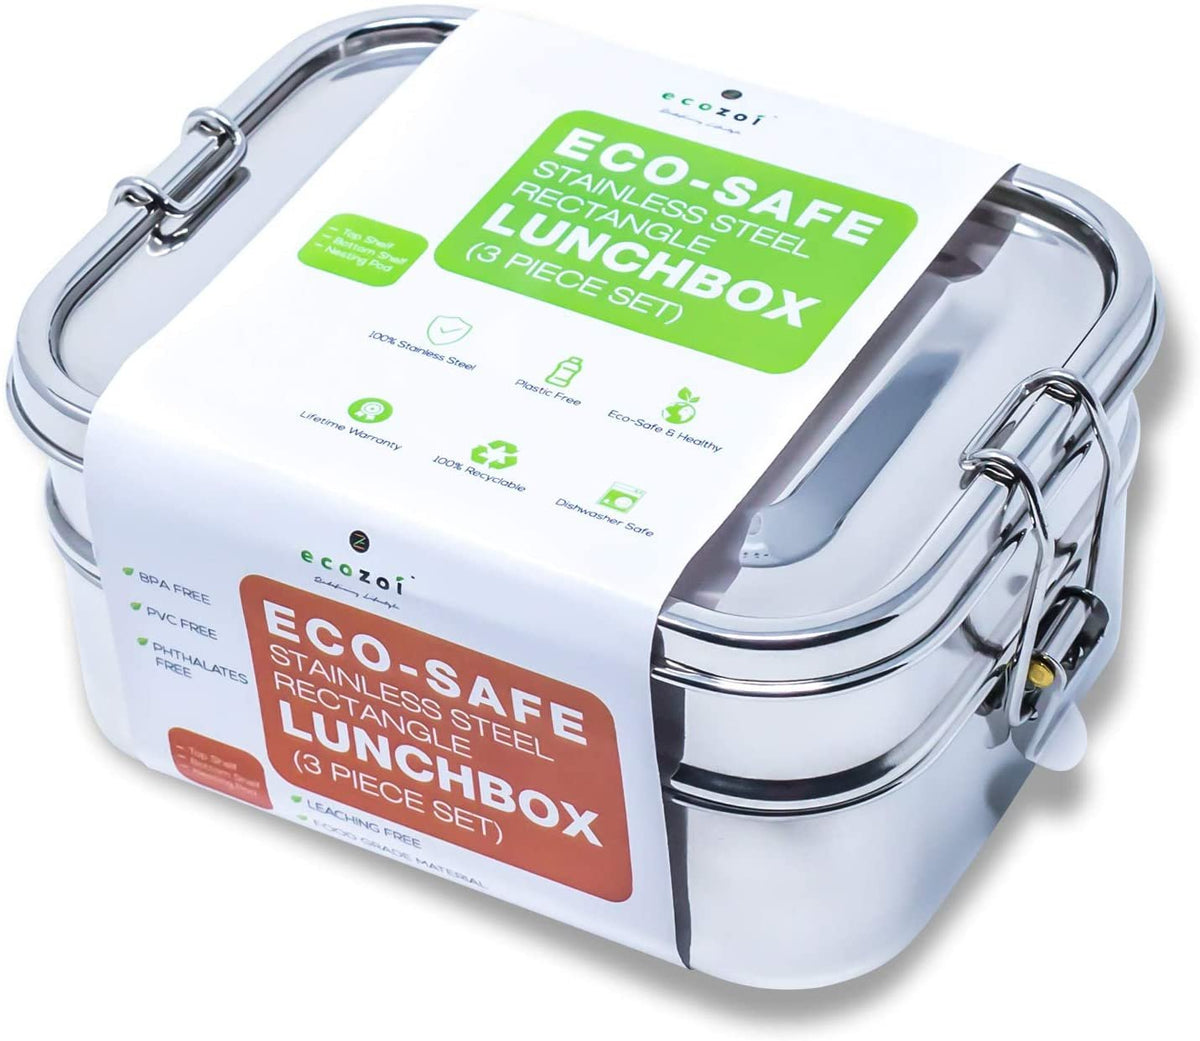 Stainless Steel Lunch Box, 2 Tier Leak Proof, 60 Oz by ecozoi